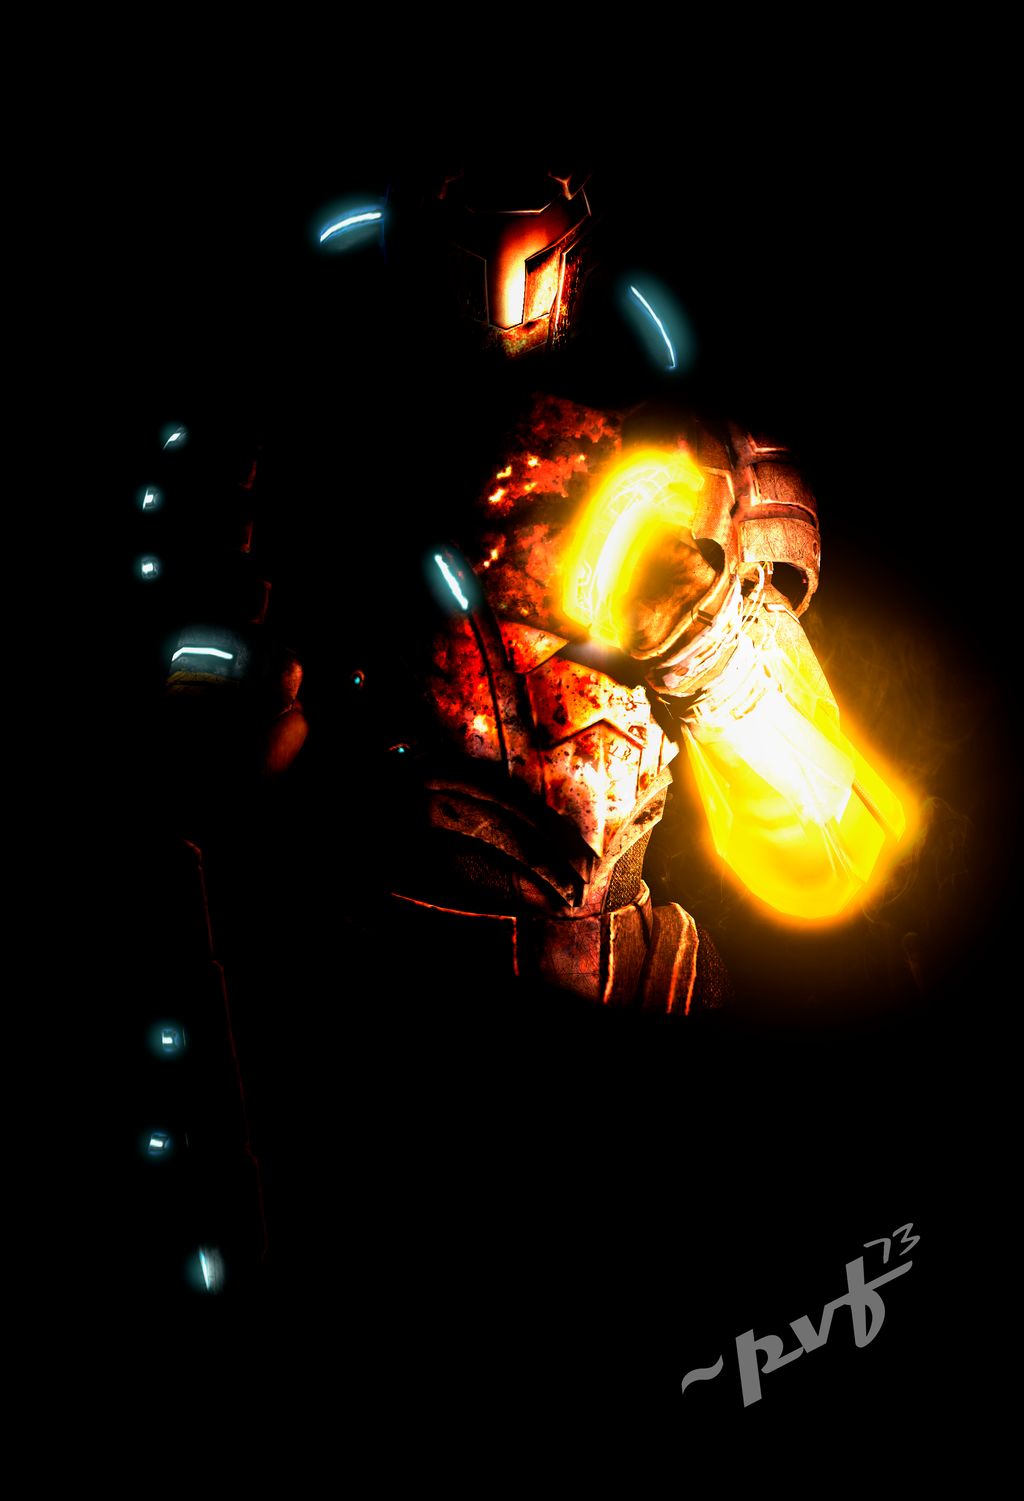 garrus___burning_in_the_dark_by_pvf73-d6428nm.png